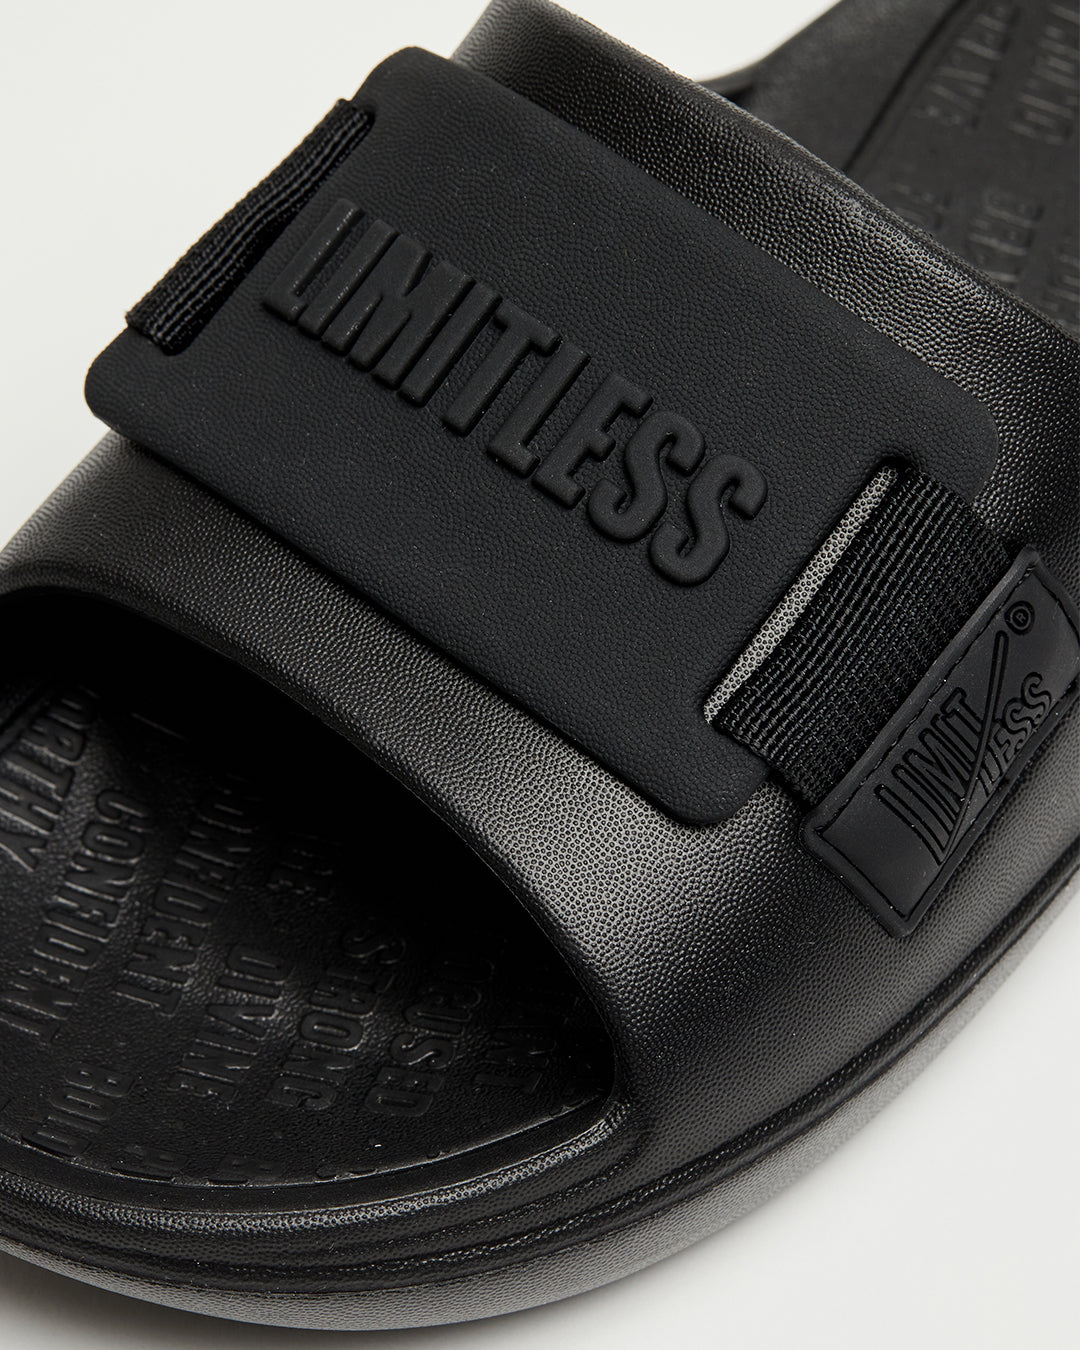 LIMITLESS SLIDES™ WITH ESSENTIAL TIBAH™ QUAD - PALISADES PARK HIGH SCHOOL EDITION